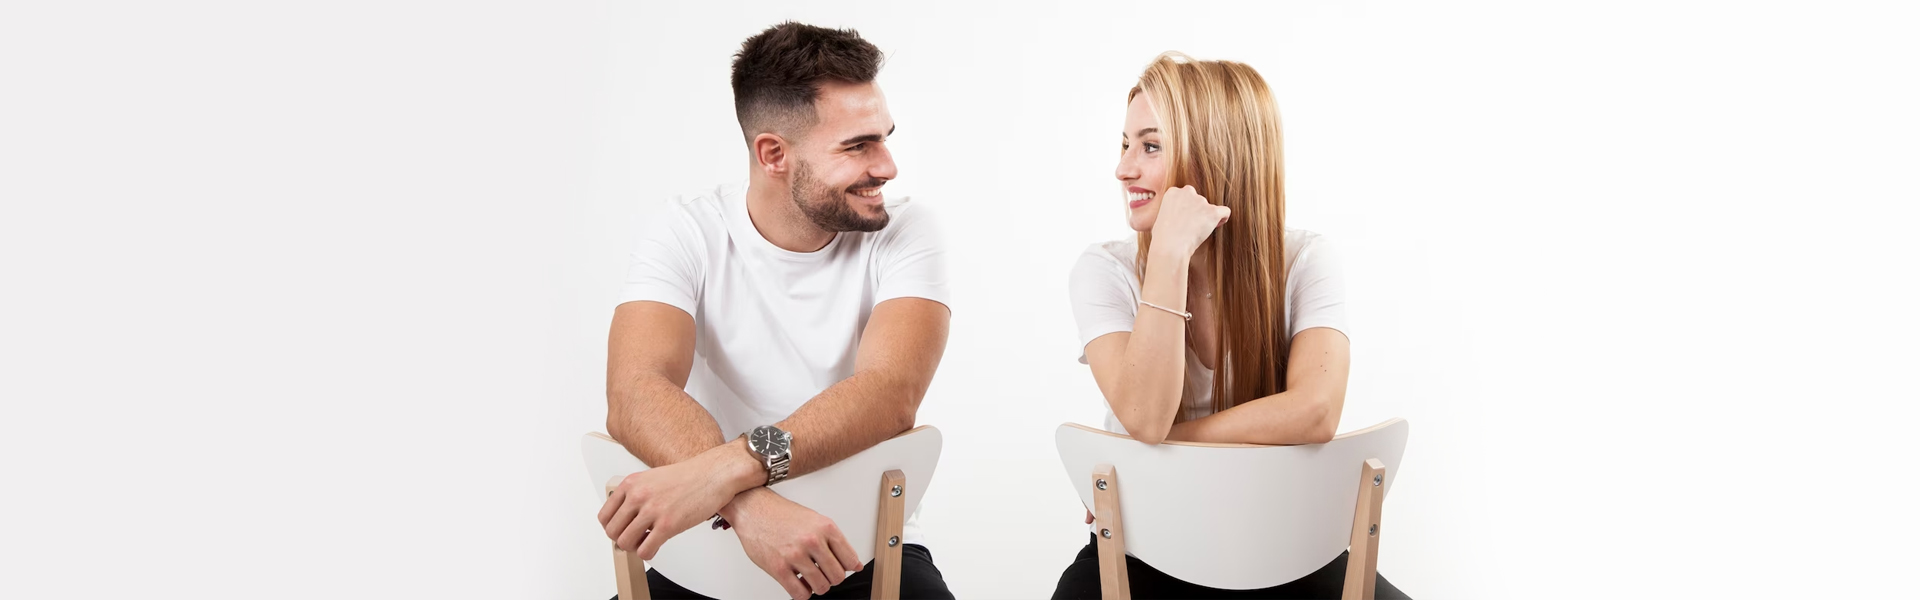 Couples Therapy and Marriage Counselling: Strengthening Relationships Through Psychotherapy